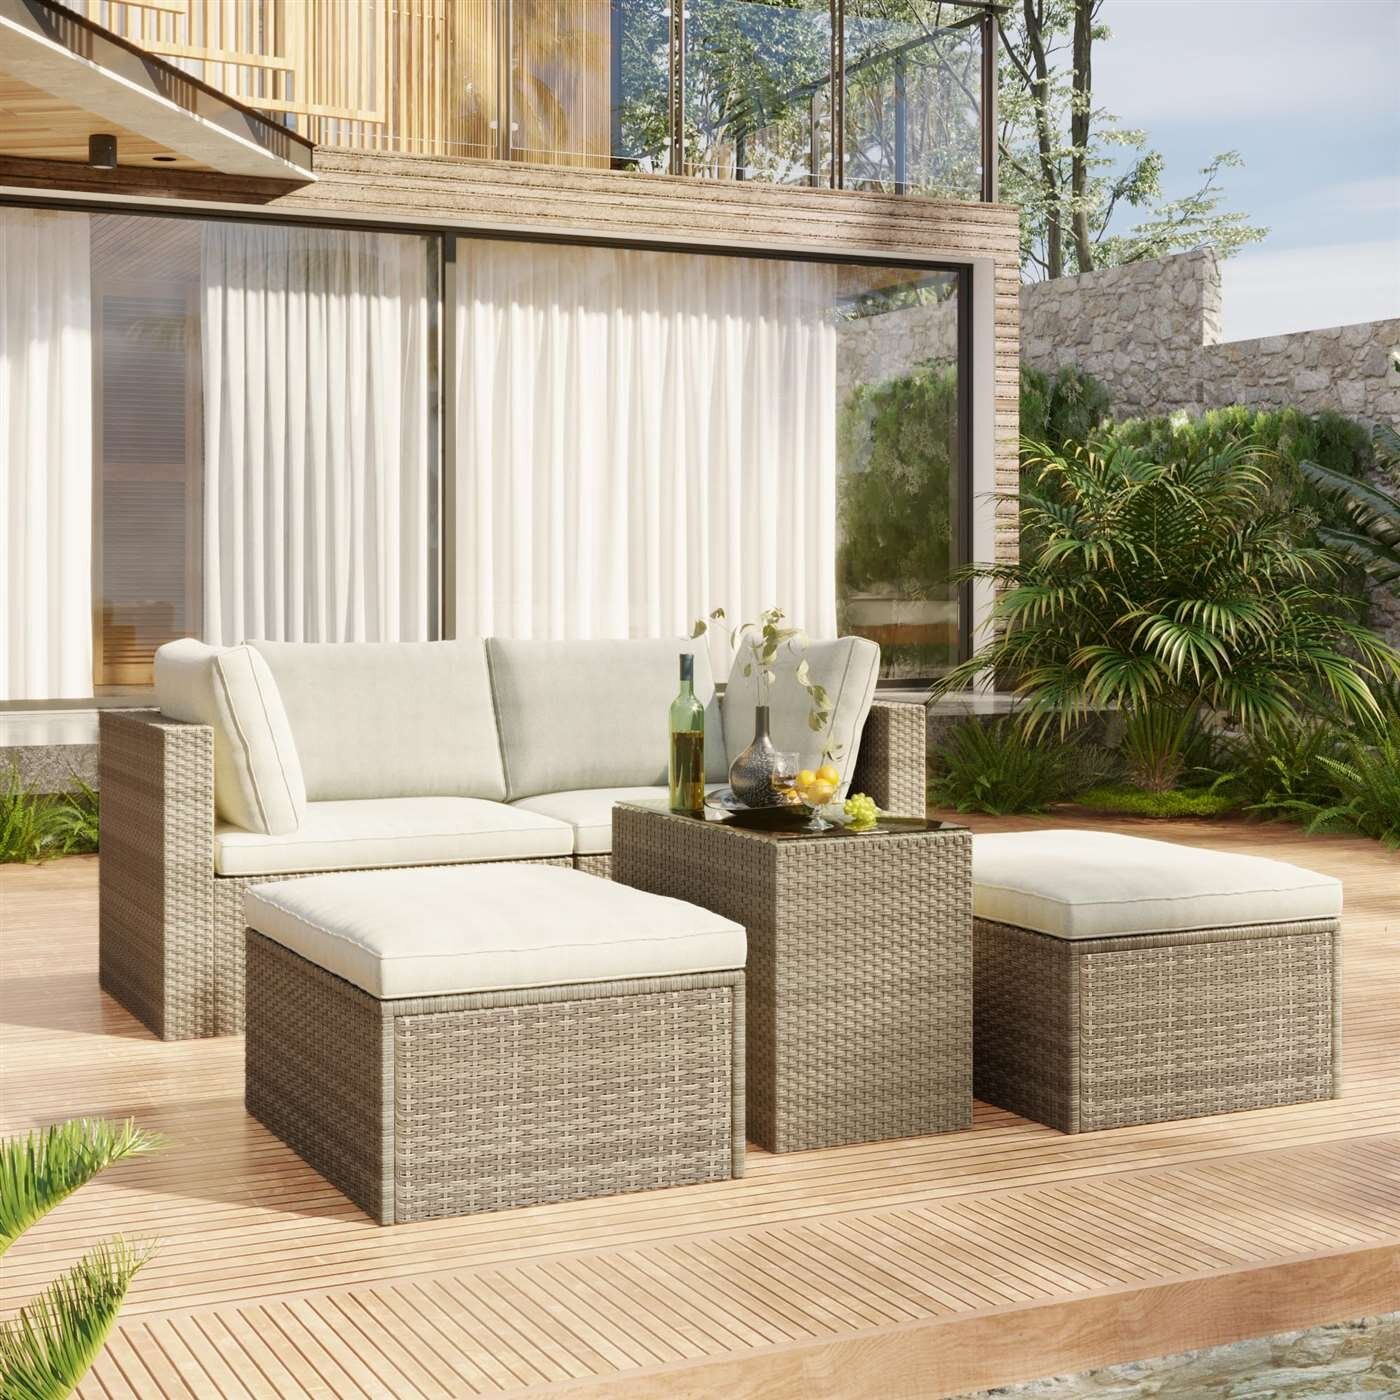 Latitude Run® Outdoor Patio Furniture Set, 5 Piece Wicker Rattan Sectional  Sofa Set, Brown And Beige | Wayfair Inside Outdoor Rattan Sectional Sofas With Coffee Table (View 6 of 15)